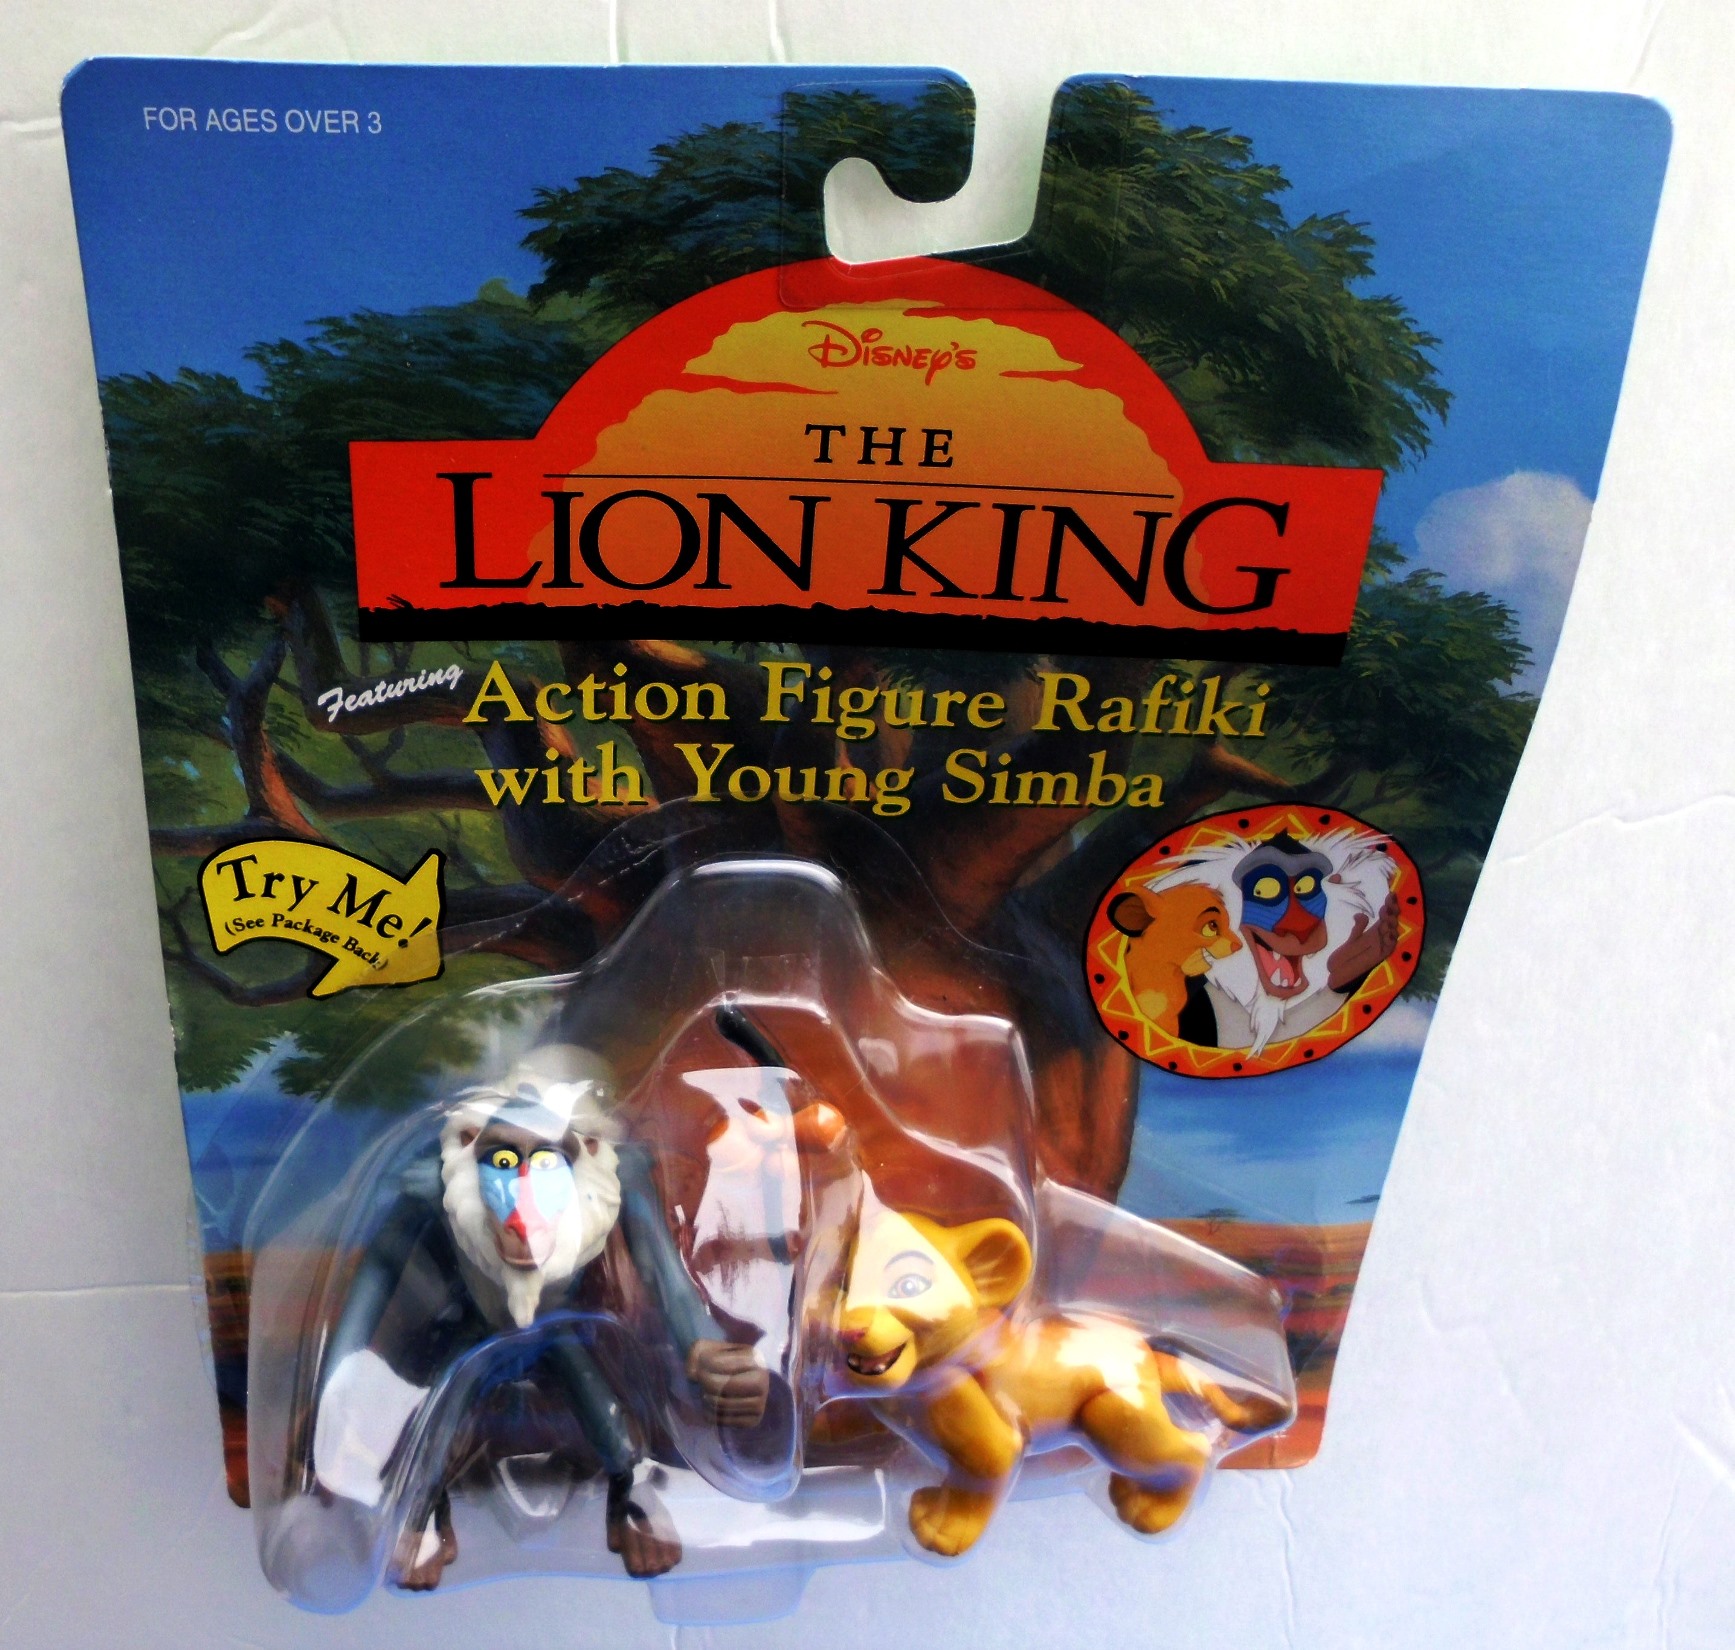 The Lion King 1994 (“Action Figure Rafiki with Young Simba”) “Disney's ...